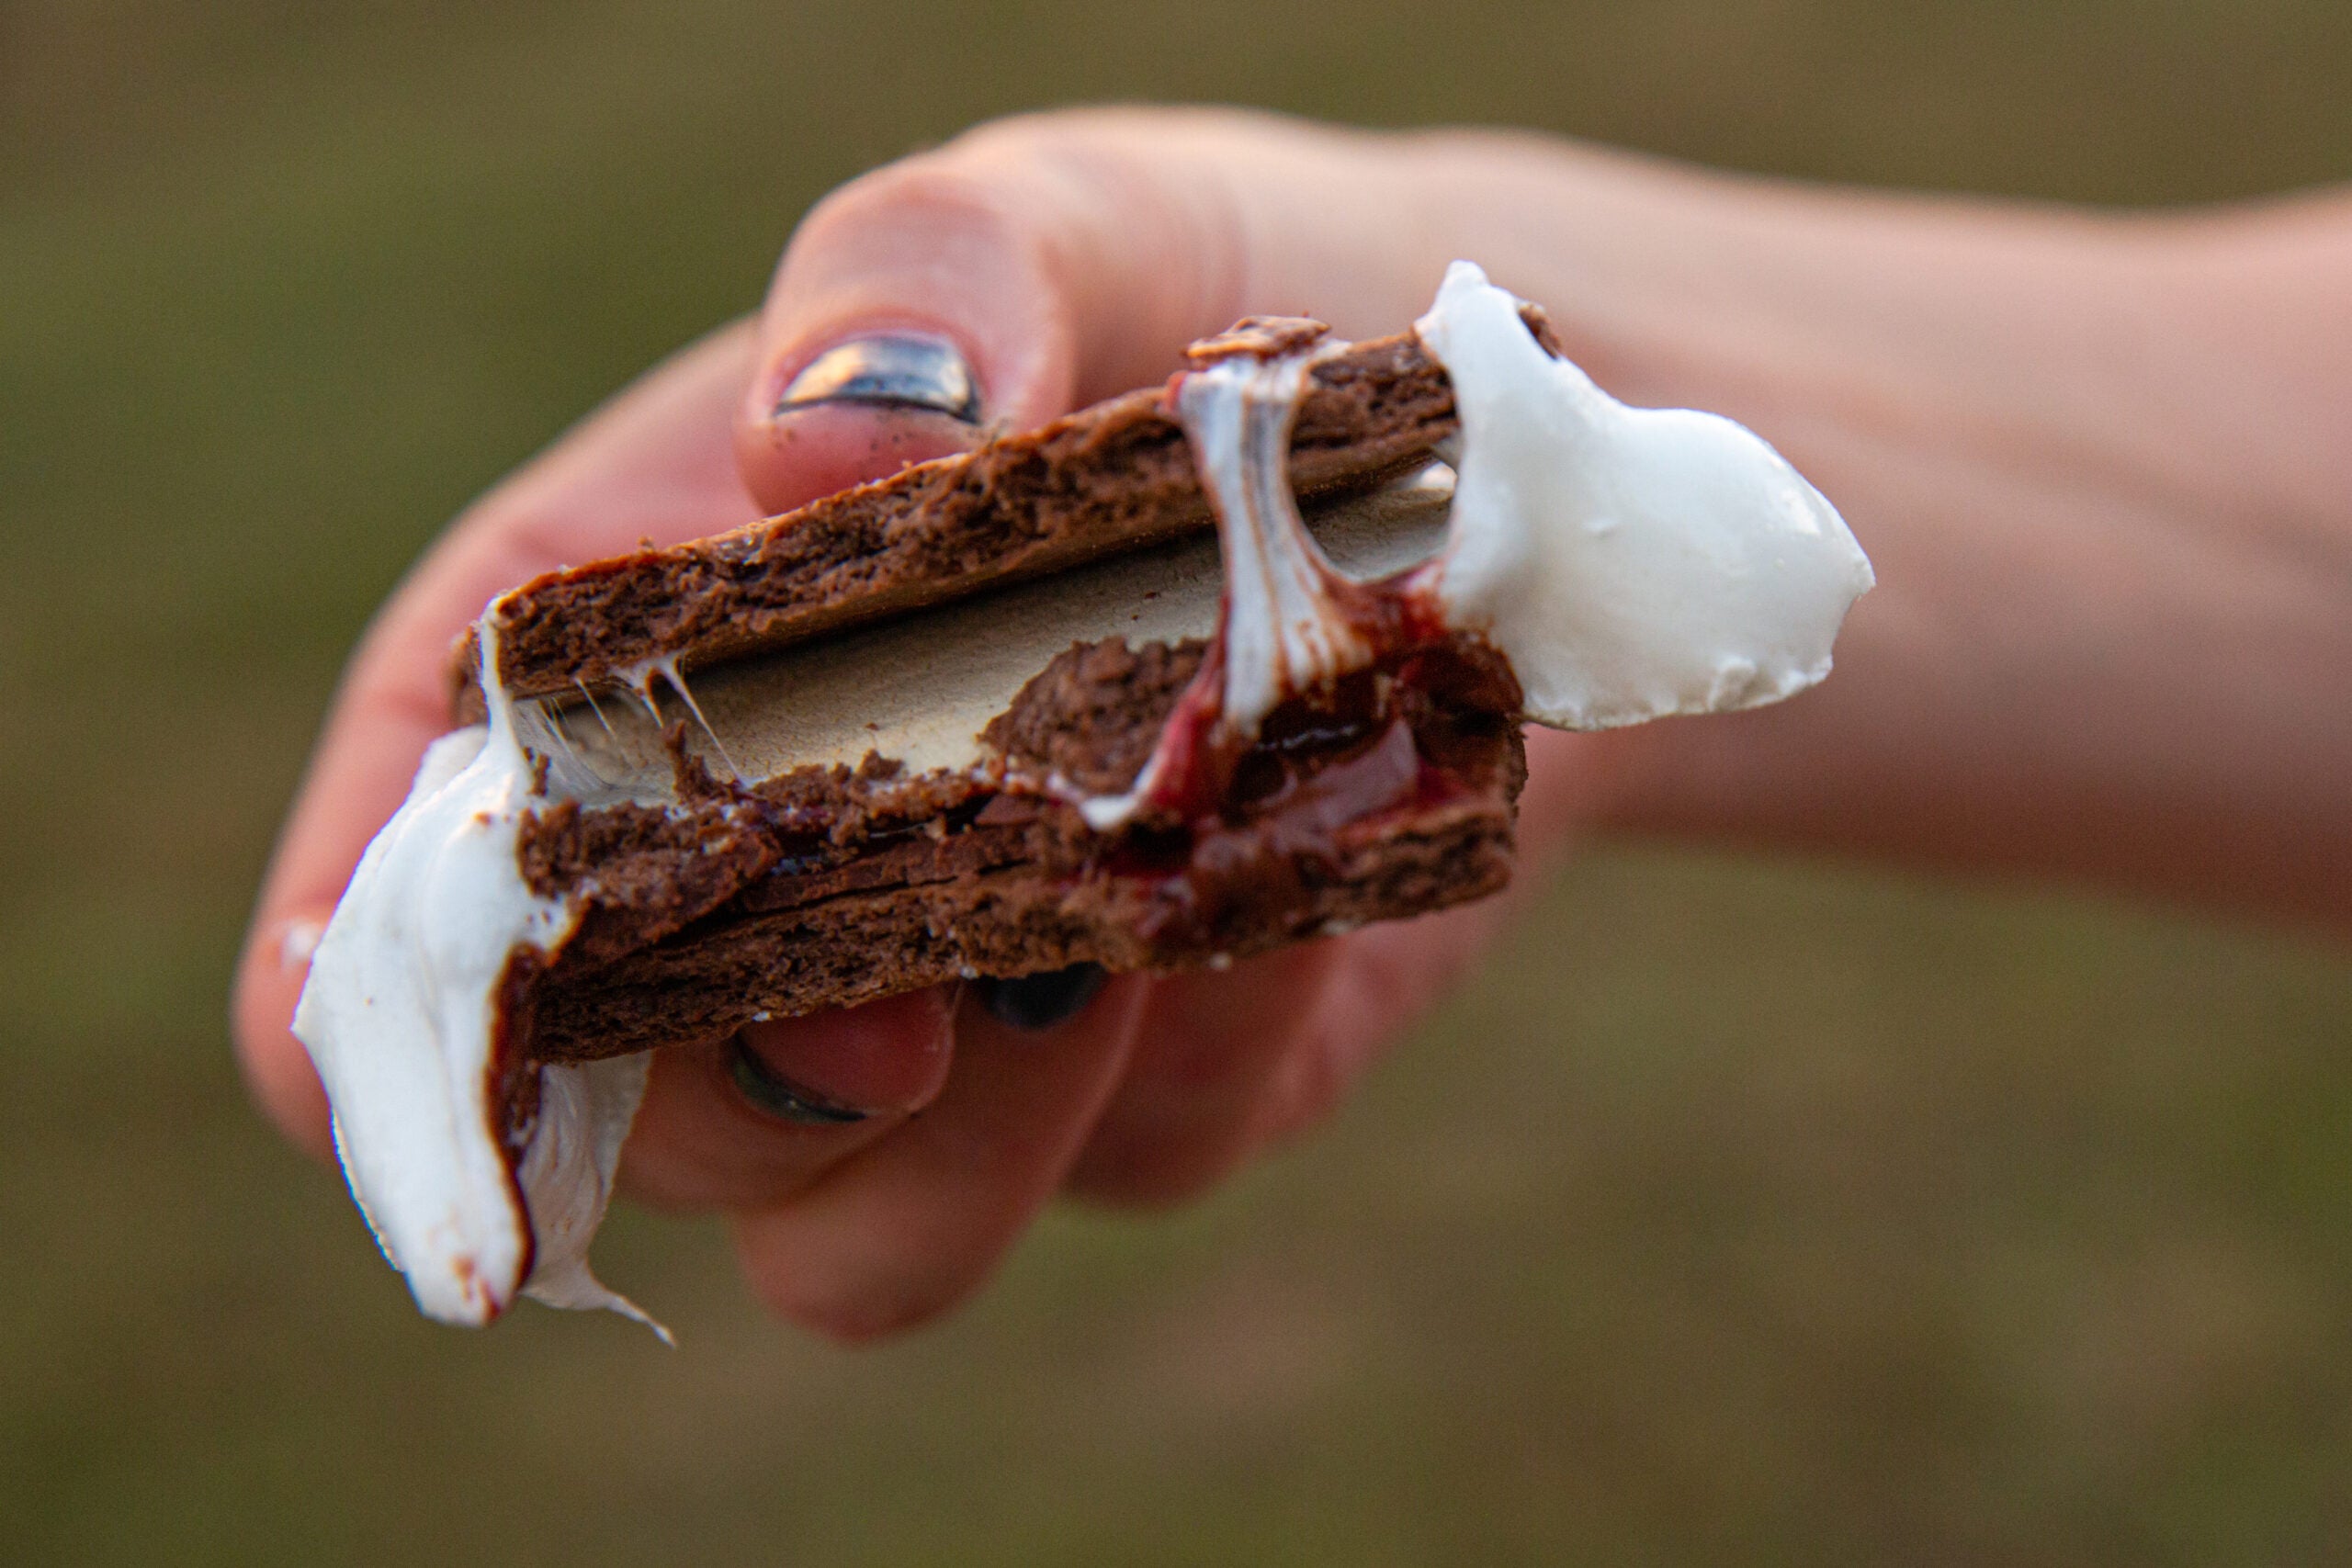 a s'more made with chocolate graham crackers is a great camping food idea for dessert